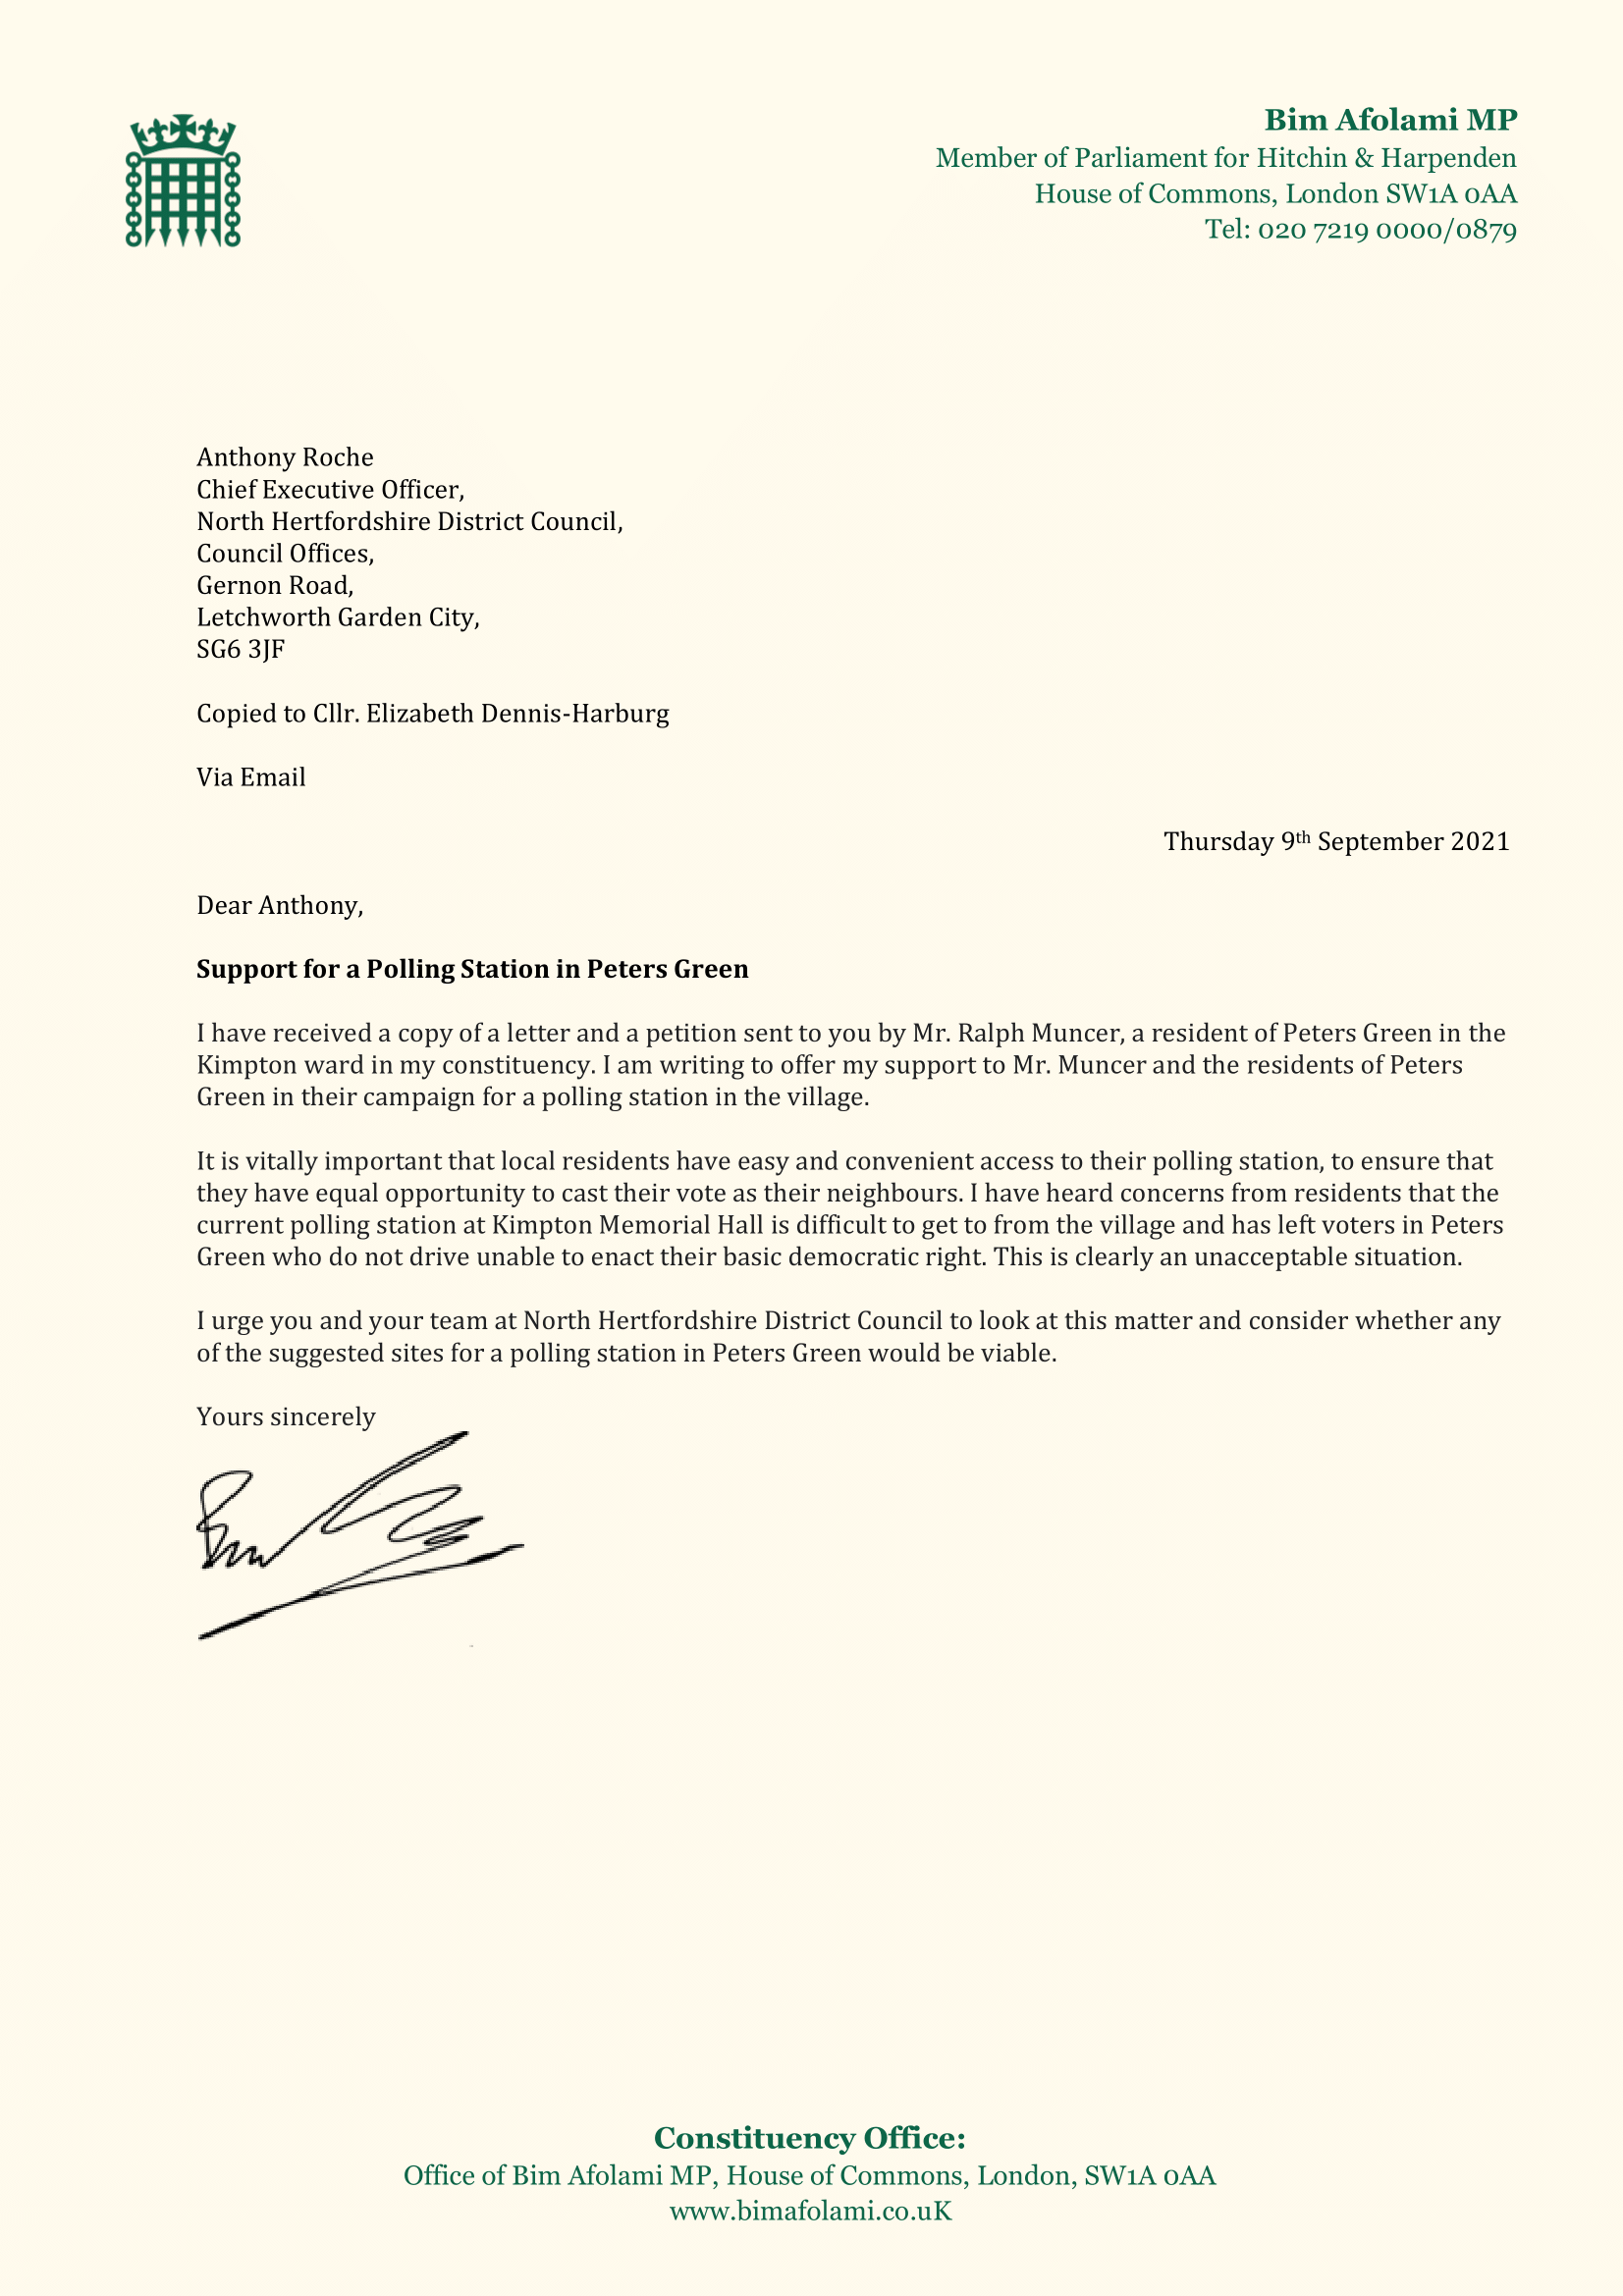 Letter to NHDC